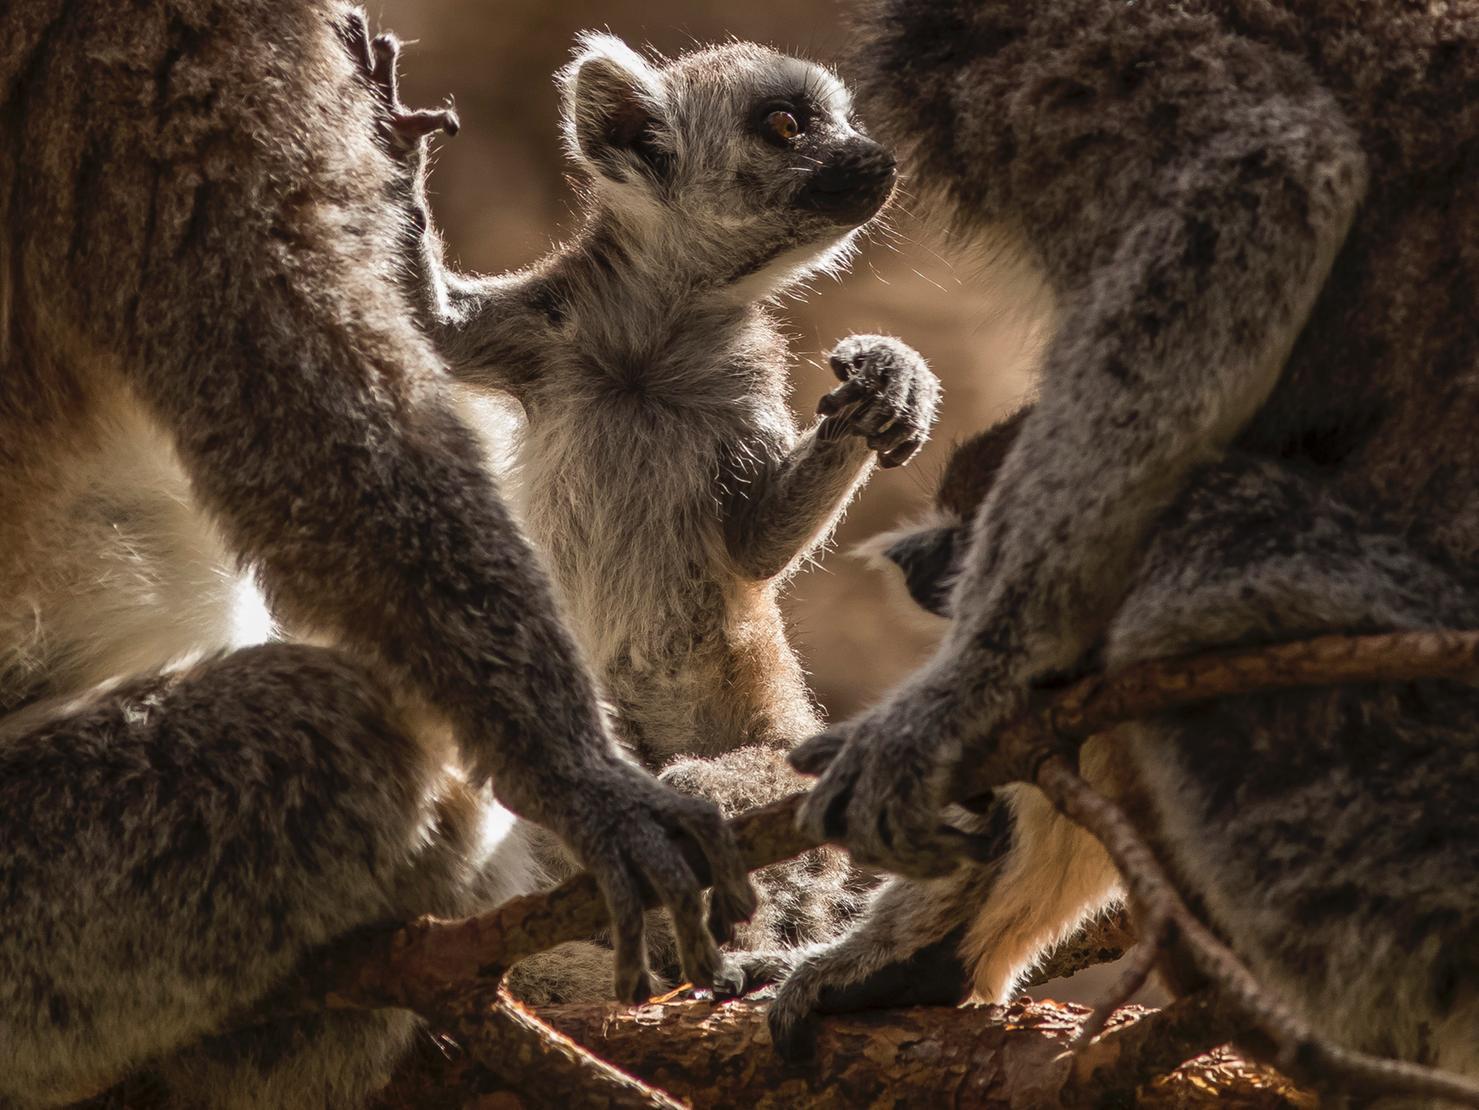 In May a heart-warming image of a baby lemur at YWP with his parents won a prestigious photography award. The image entitled Safe Hands was taken by photographer David Roberts.